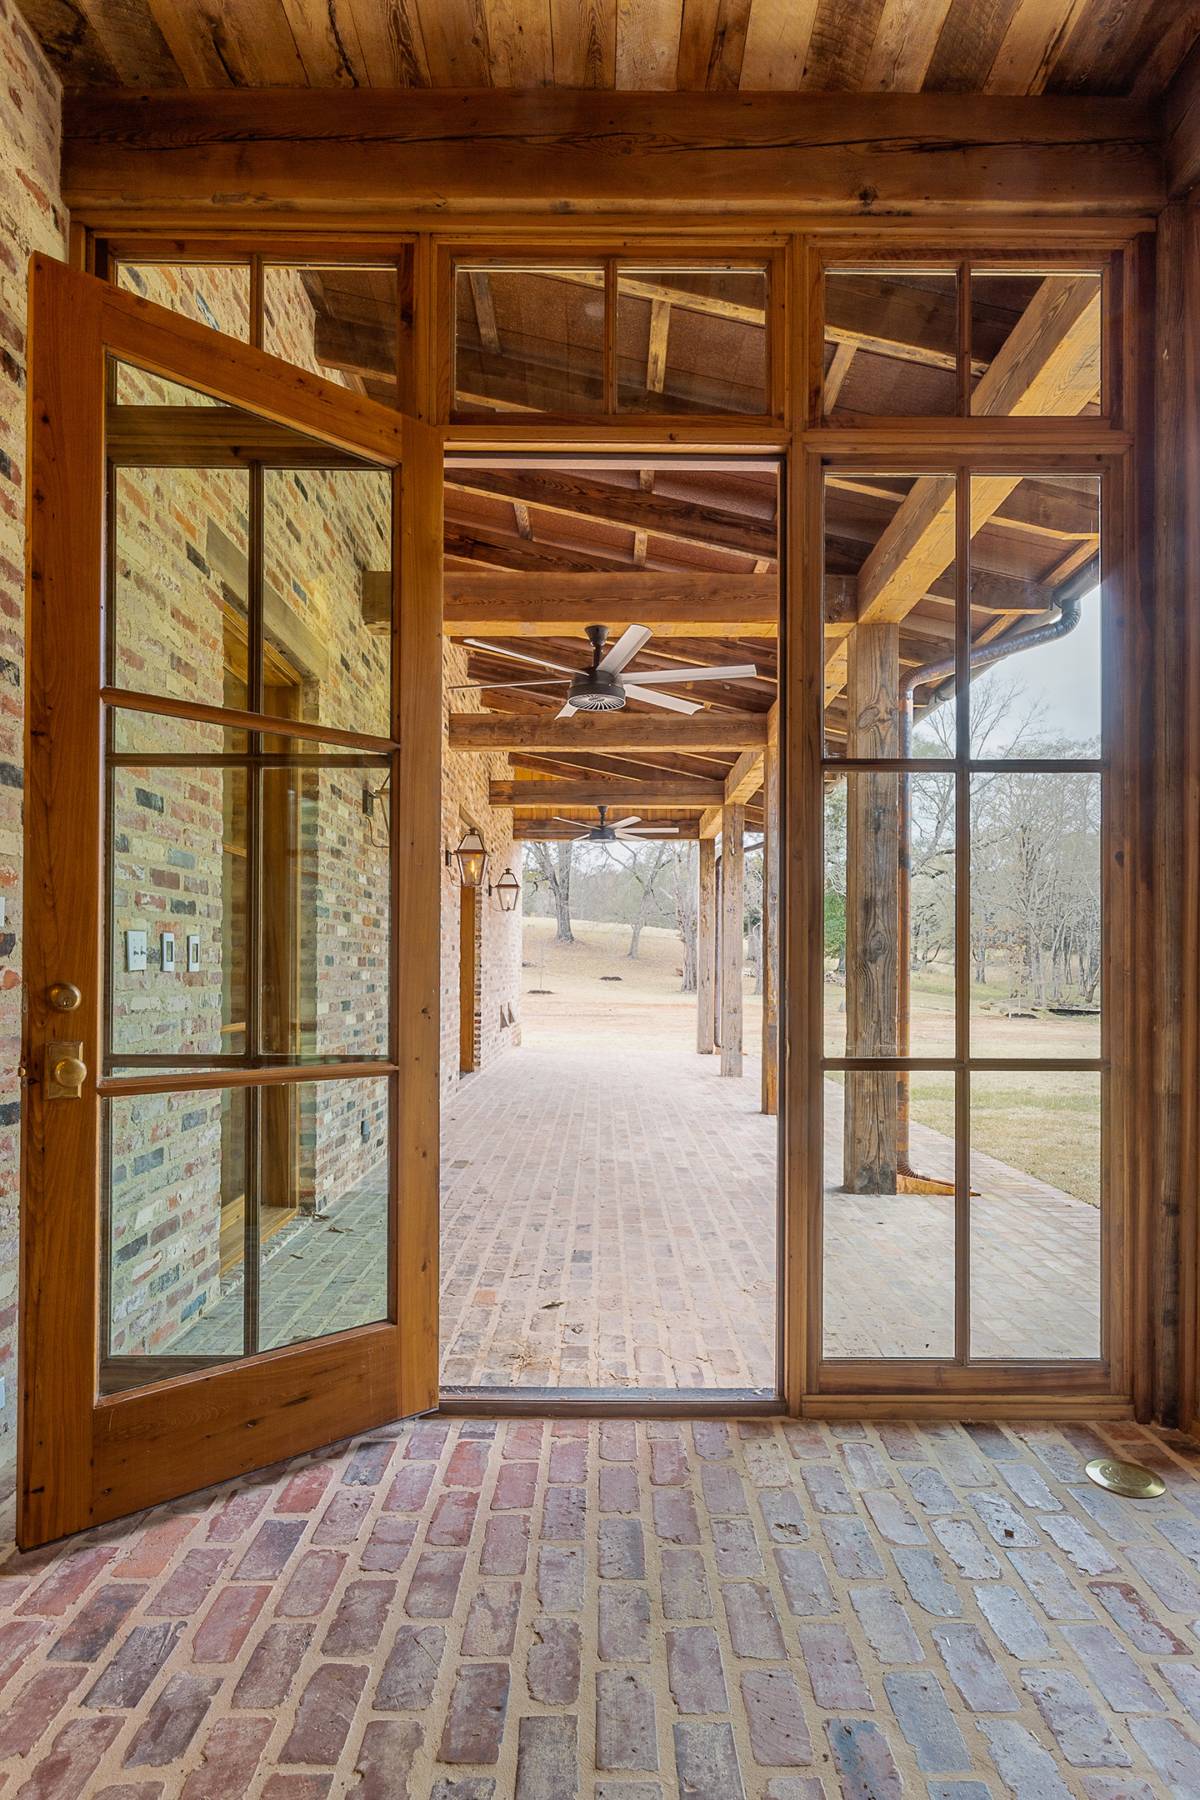 Interior detailed view of a rustic glass door at Louisiana Rustic, a custom home designed and built by Farmer Payne Architects.